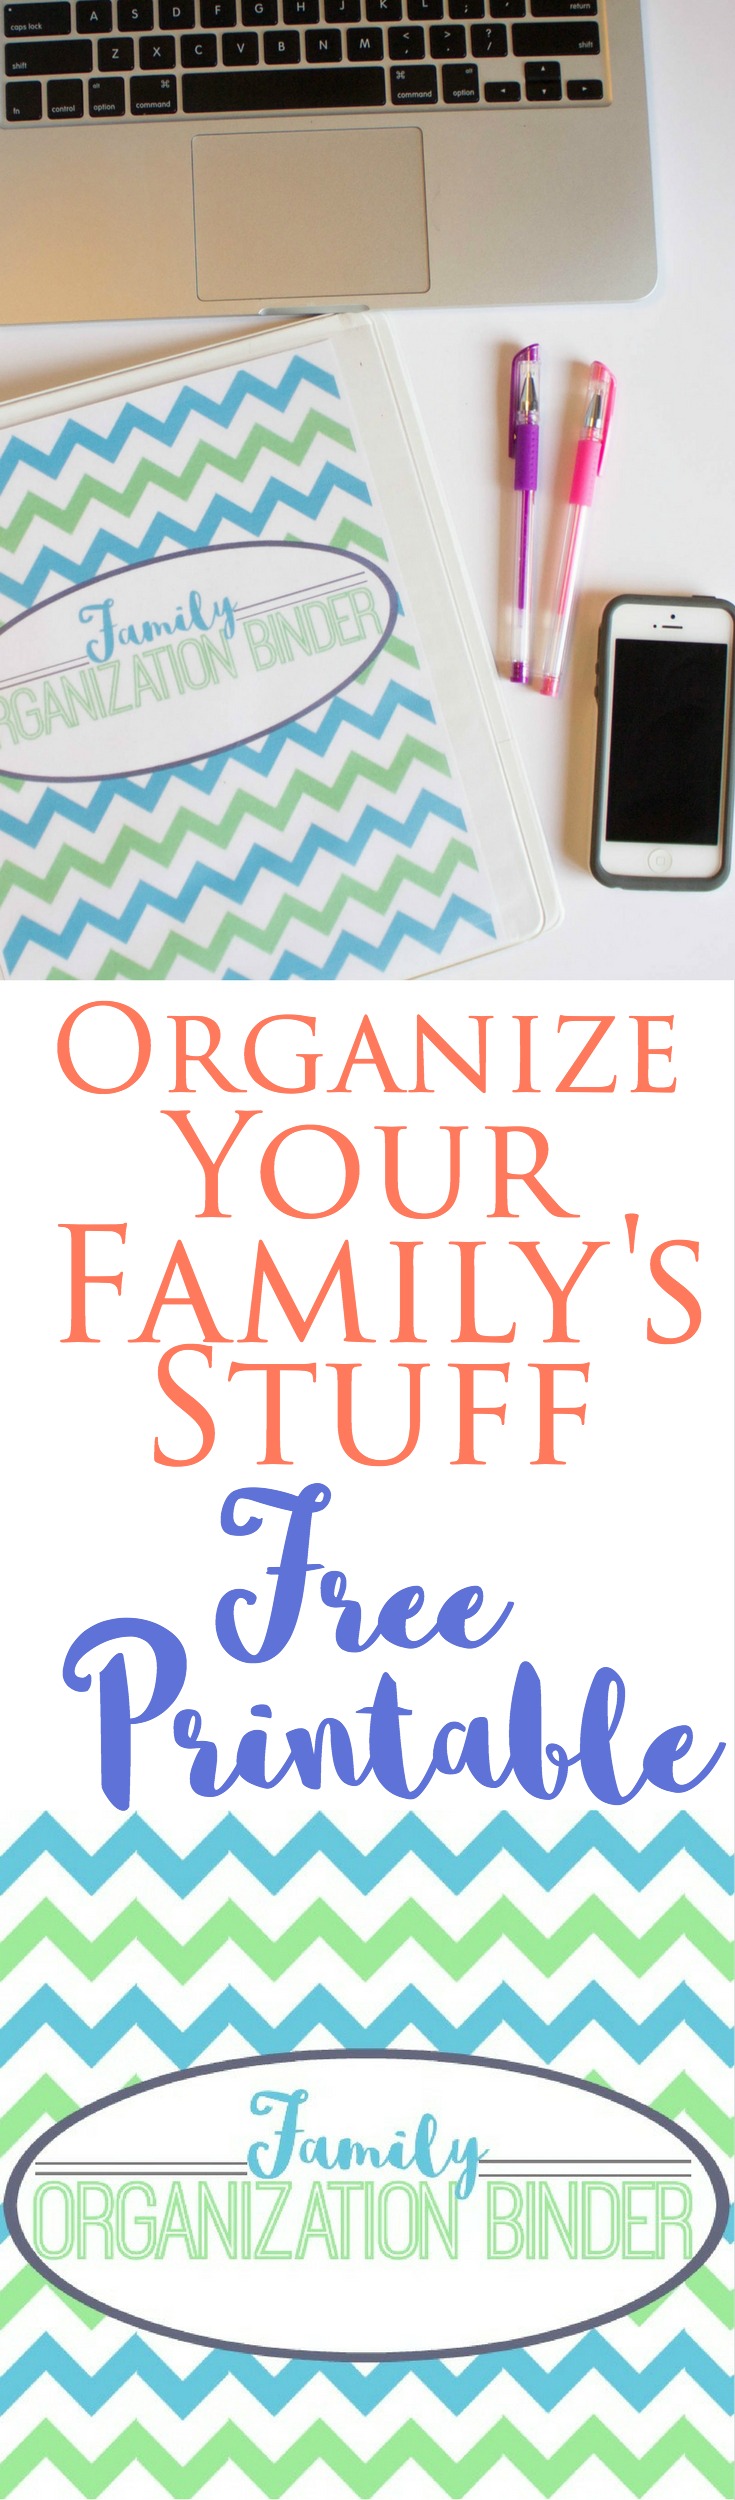 I'm offering this family binder cover on the blog today! Several of my posts feature free organizer ideas, so be sure and check out the "DIY" section under my "Family"categories tab in the blog header!